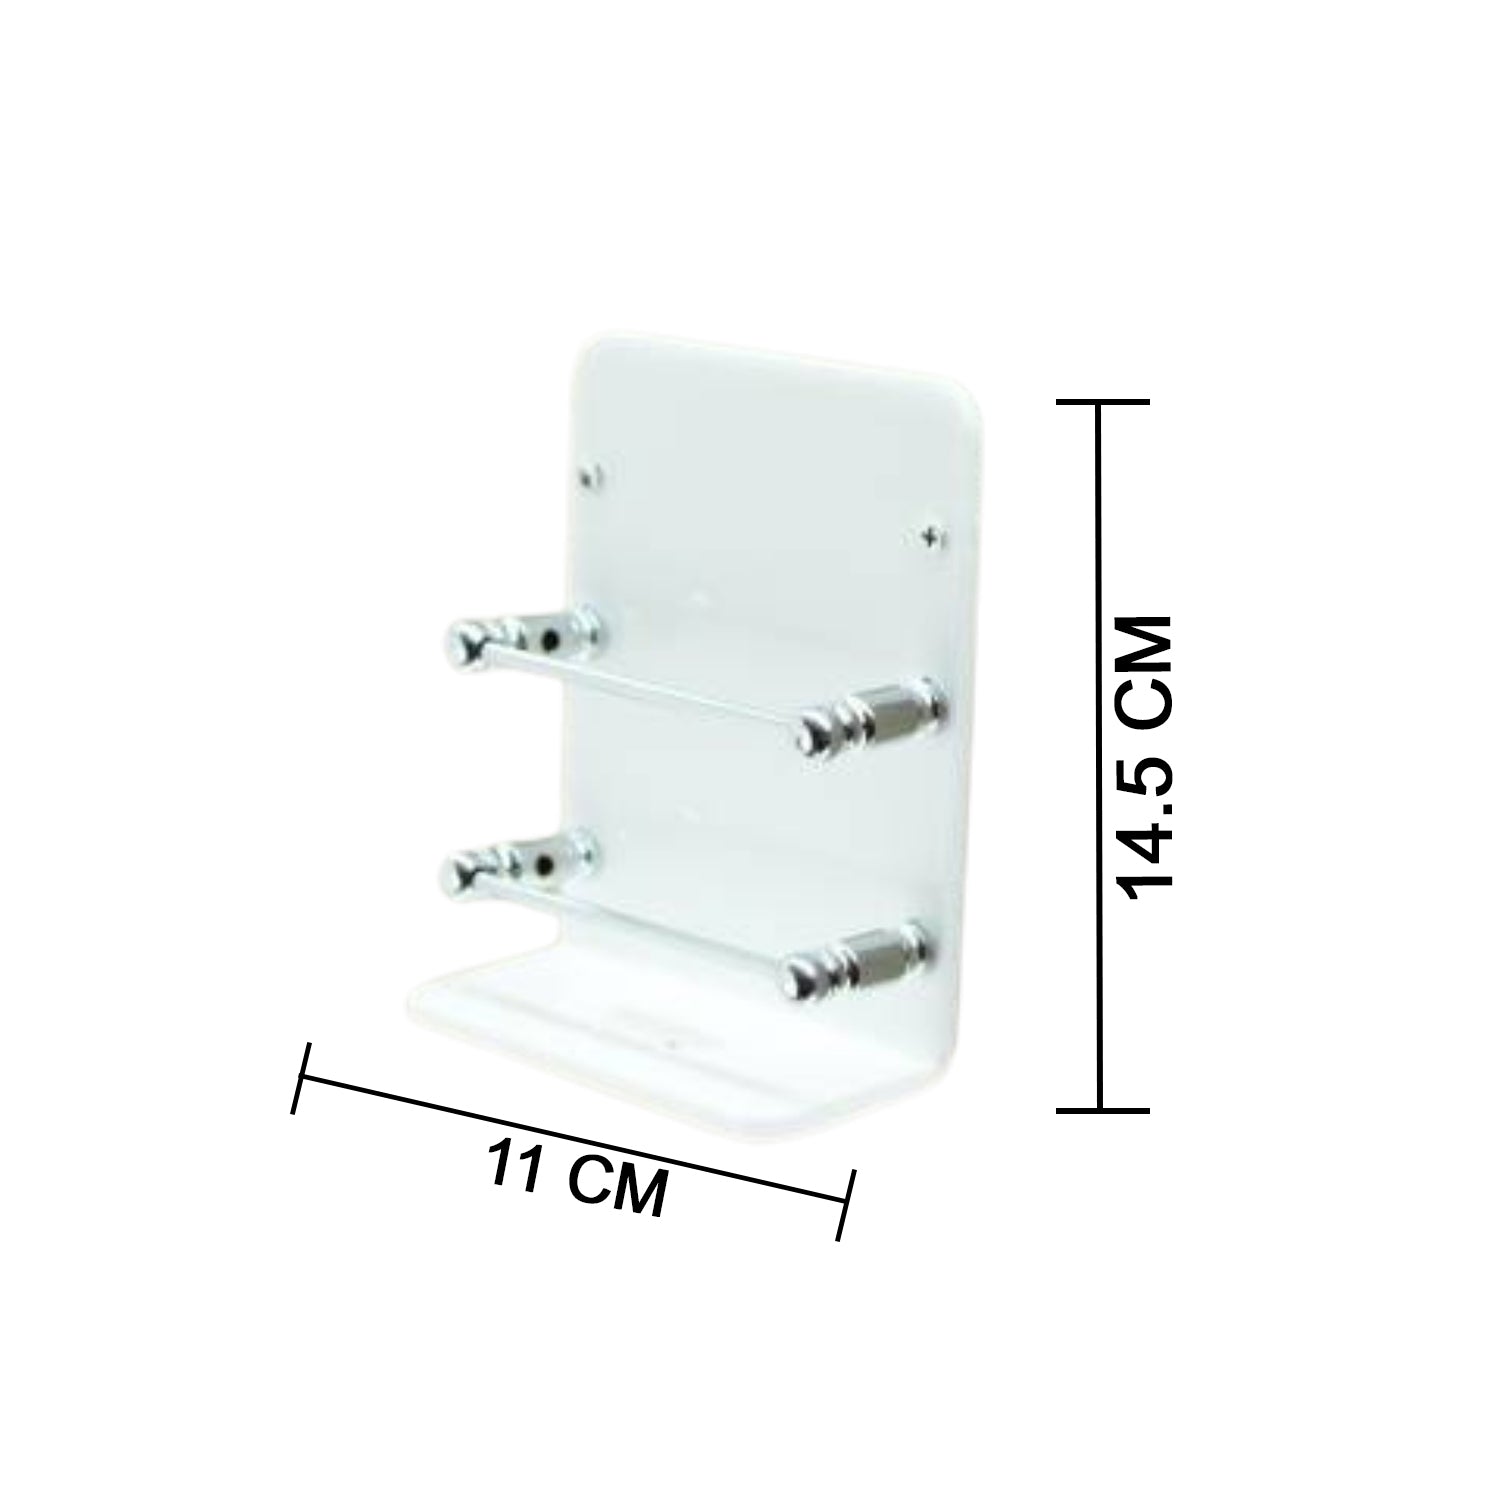 0703A Mobile Stand H 105 used in all kinds of household and official places especially mobile support and easy handling purposes.